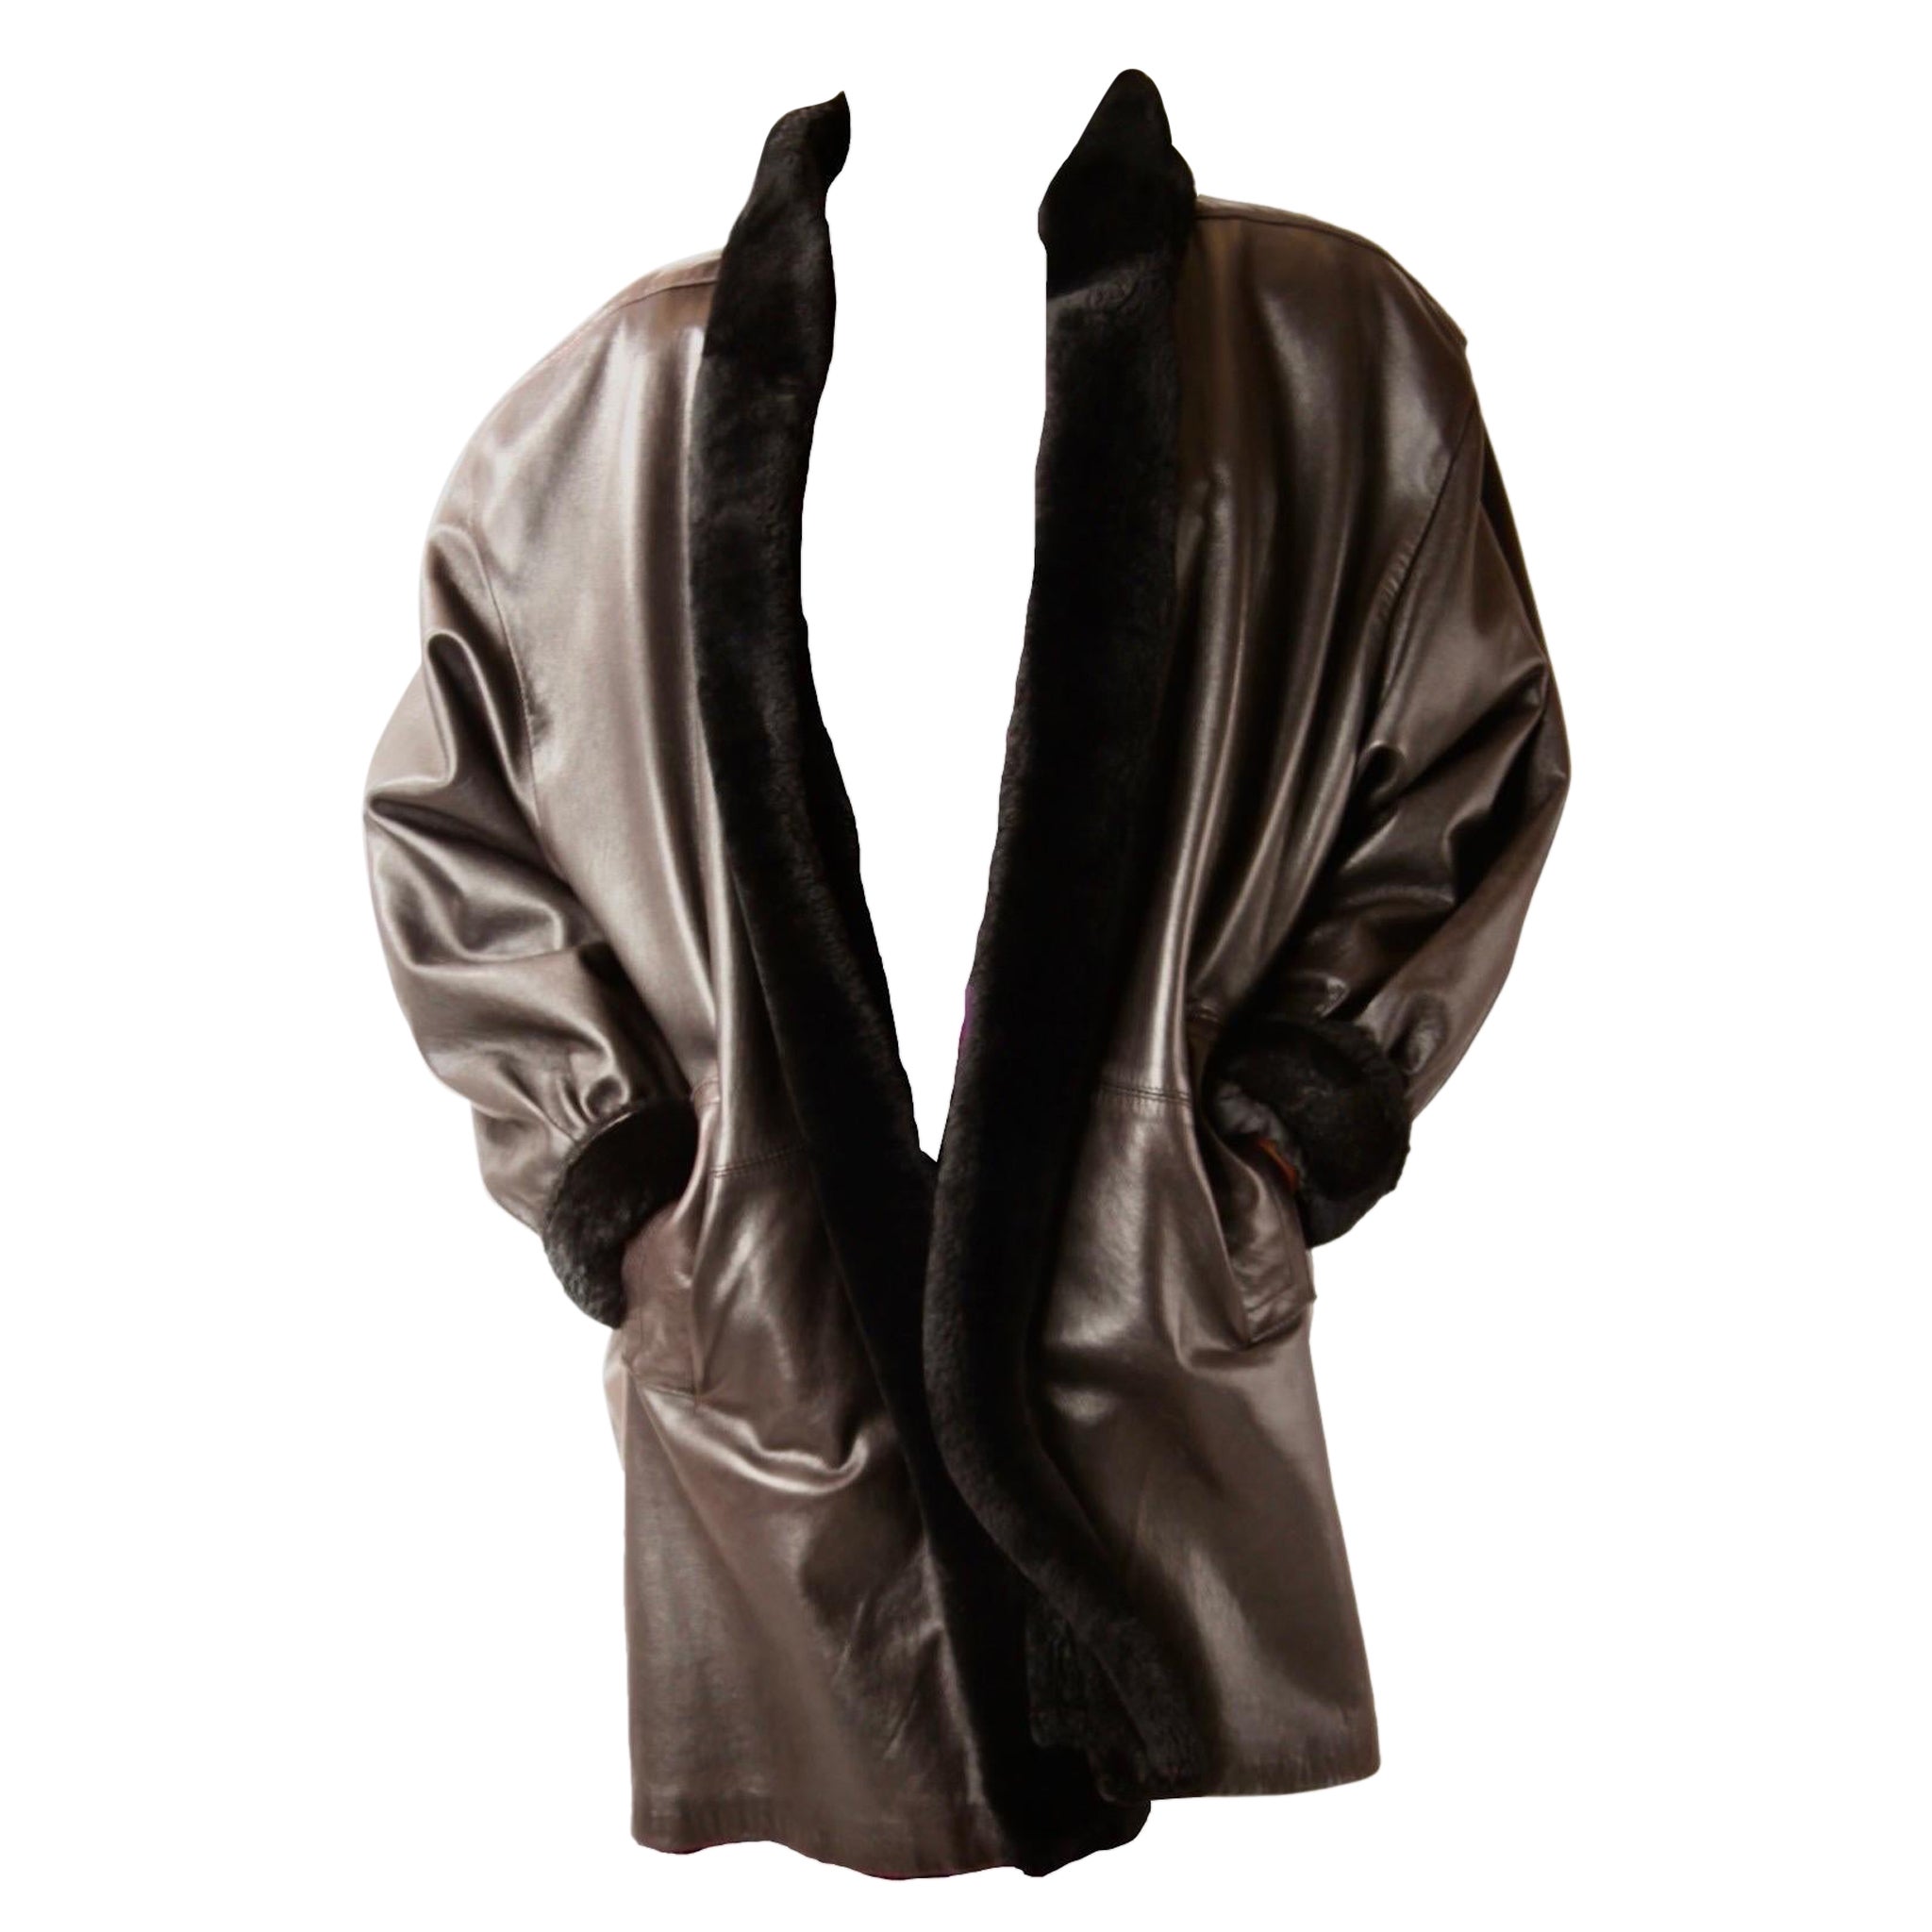 Yves Saint Laurent  oversize silhouette  chocolate shearling coat. C. 1980s For Sale